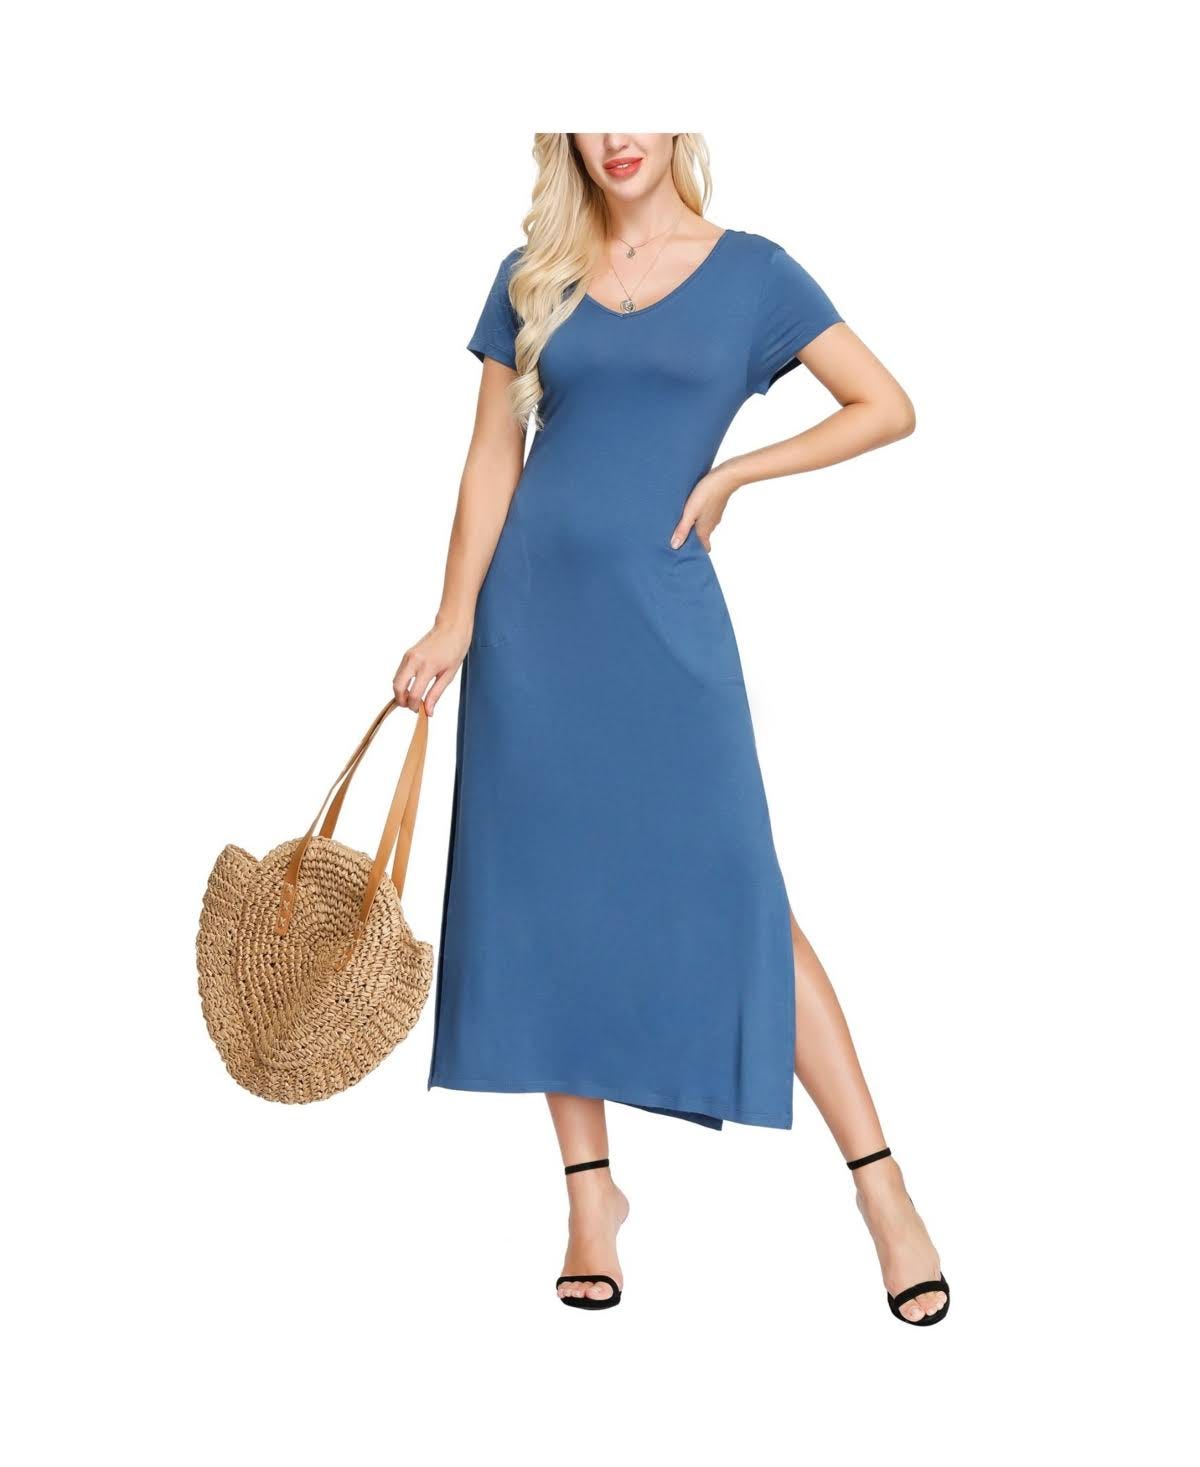 Stretchy Rayon V-Neck Dress with Pockets for versatile and comfortable wear | Image